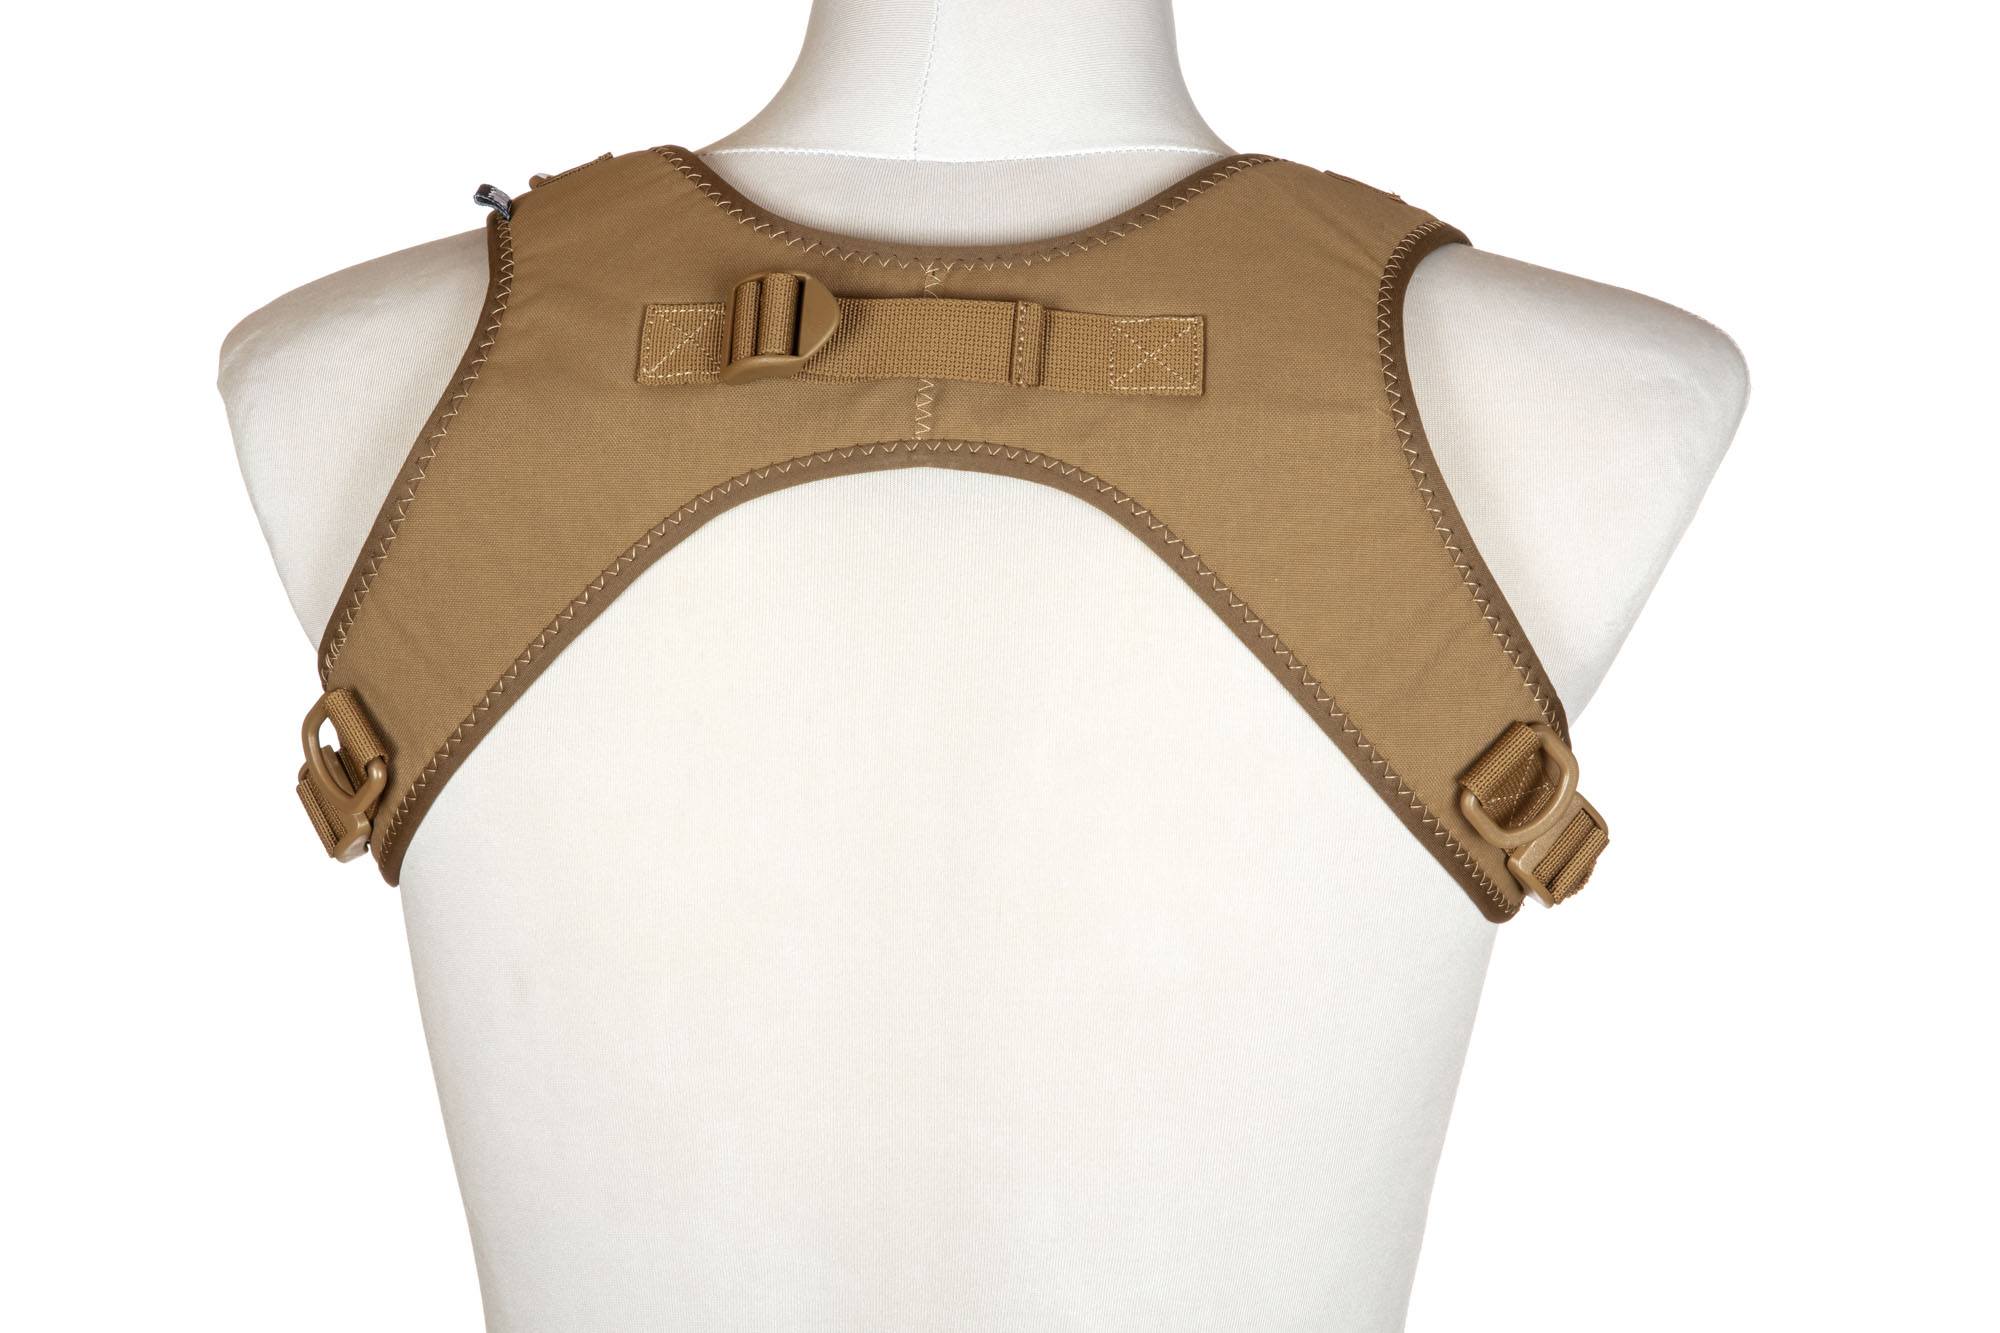 Sling Harness Tacotherium - Coyote Brown